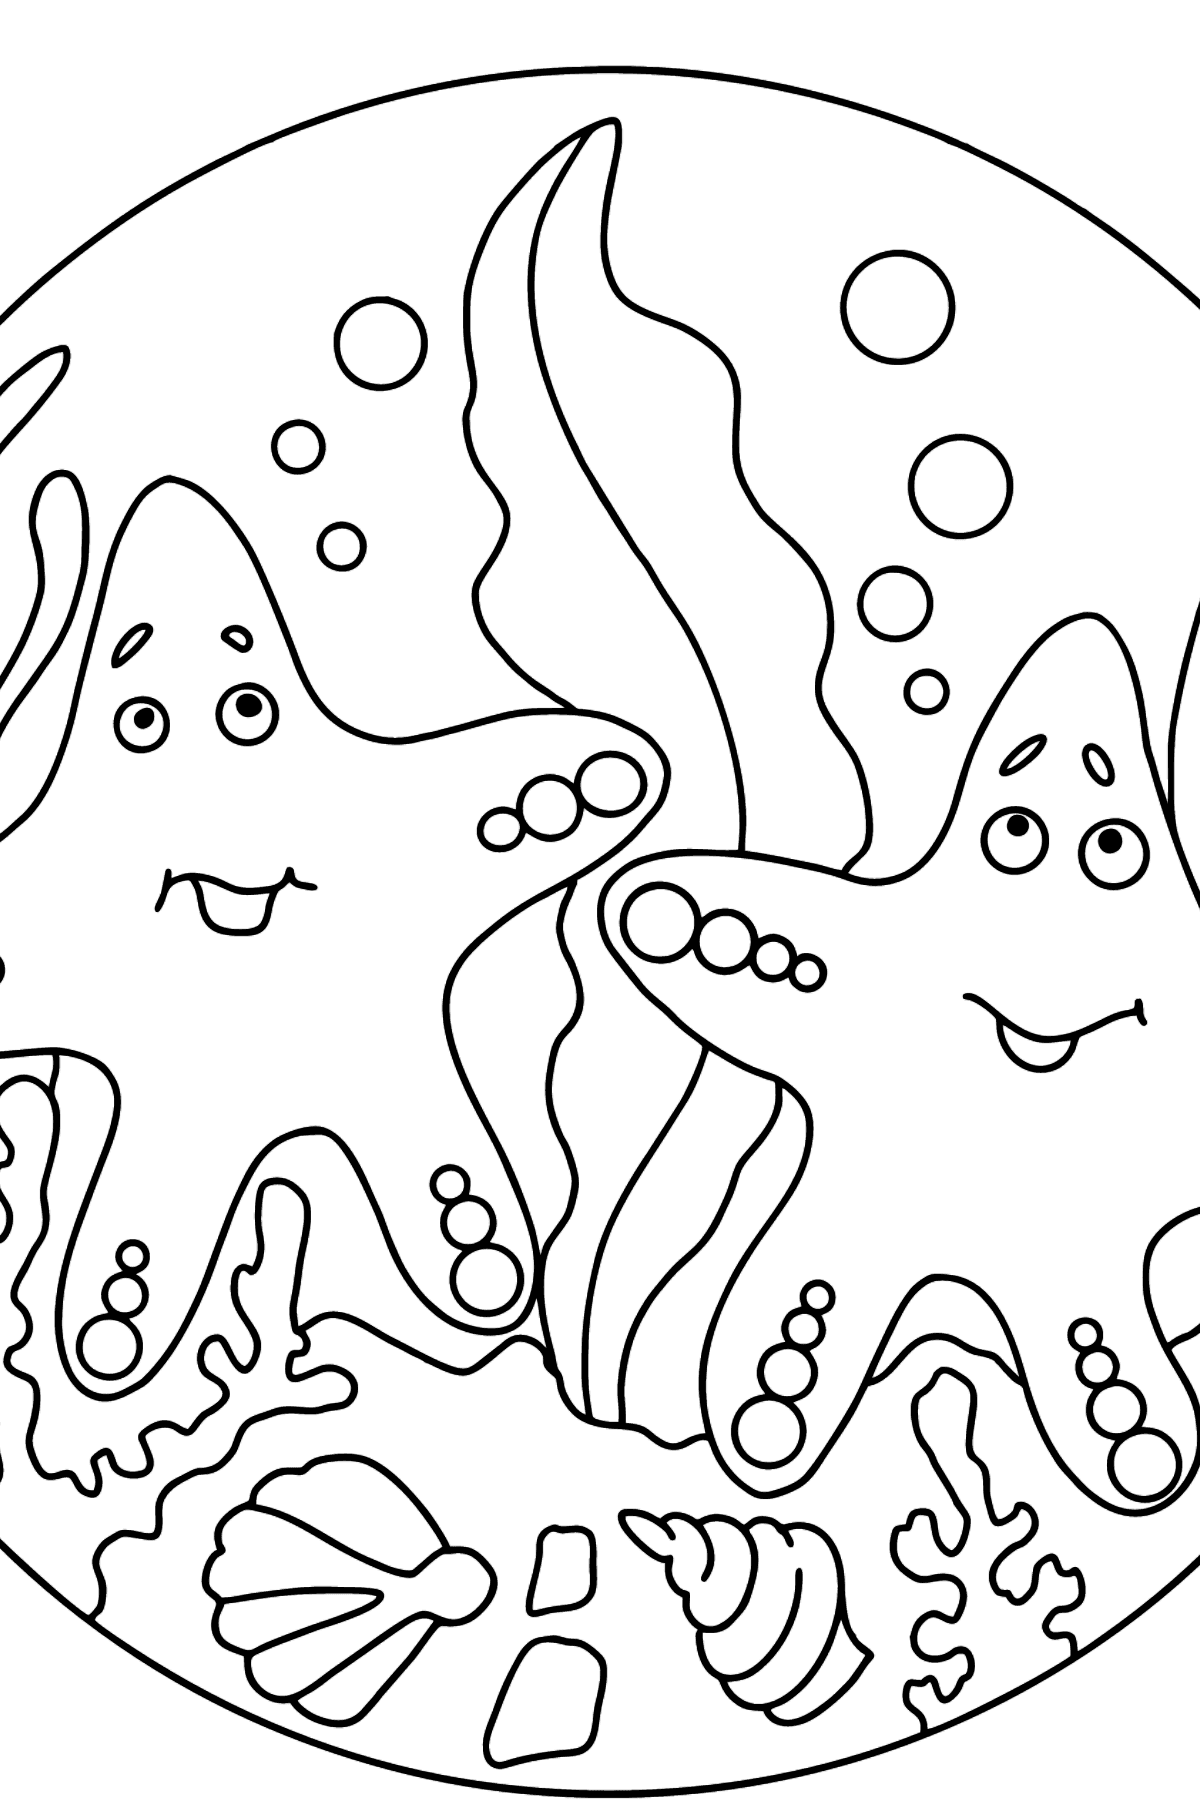 Two Starfish Coloring Page (Difficult) - Coloring Pages for Kids